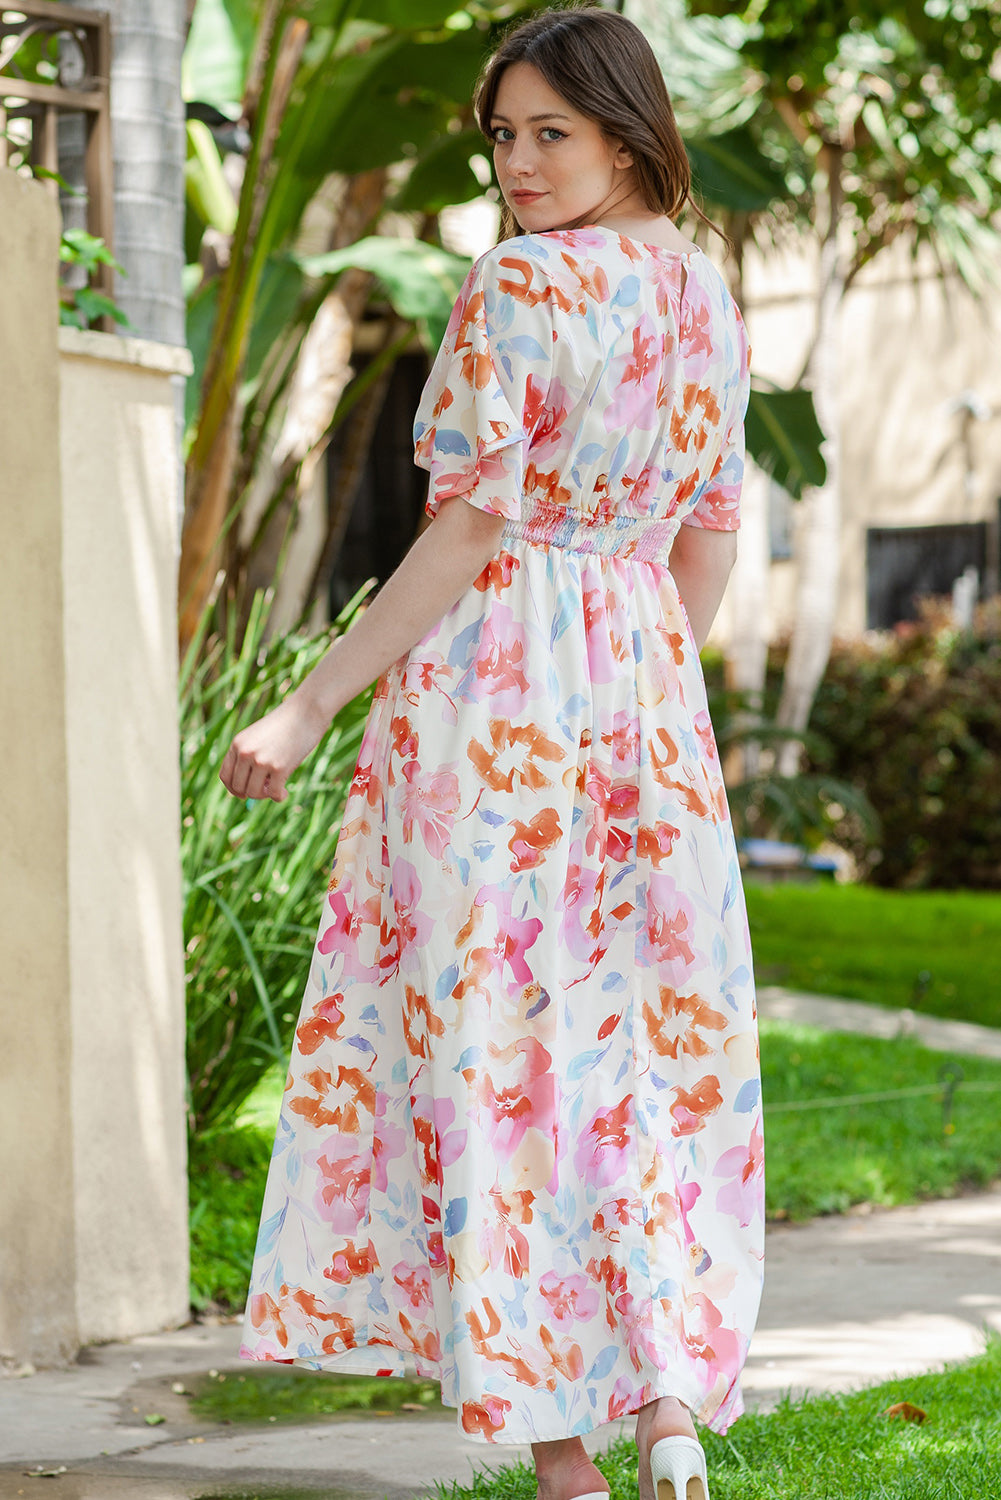 Summer Chic: Floral Deep V Slit Maxi Dress - Perfect for Beach Weddings and Parties!